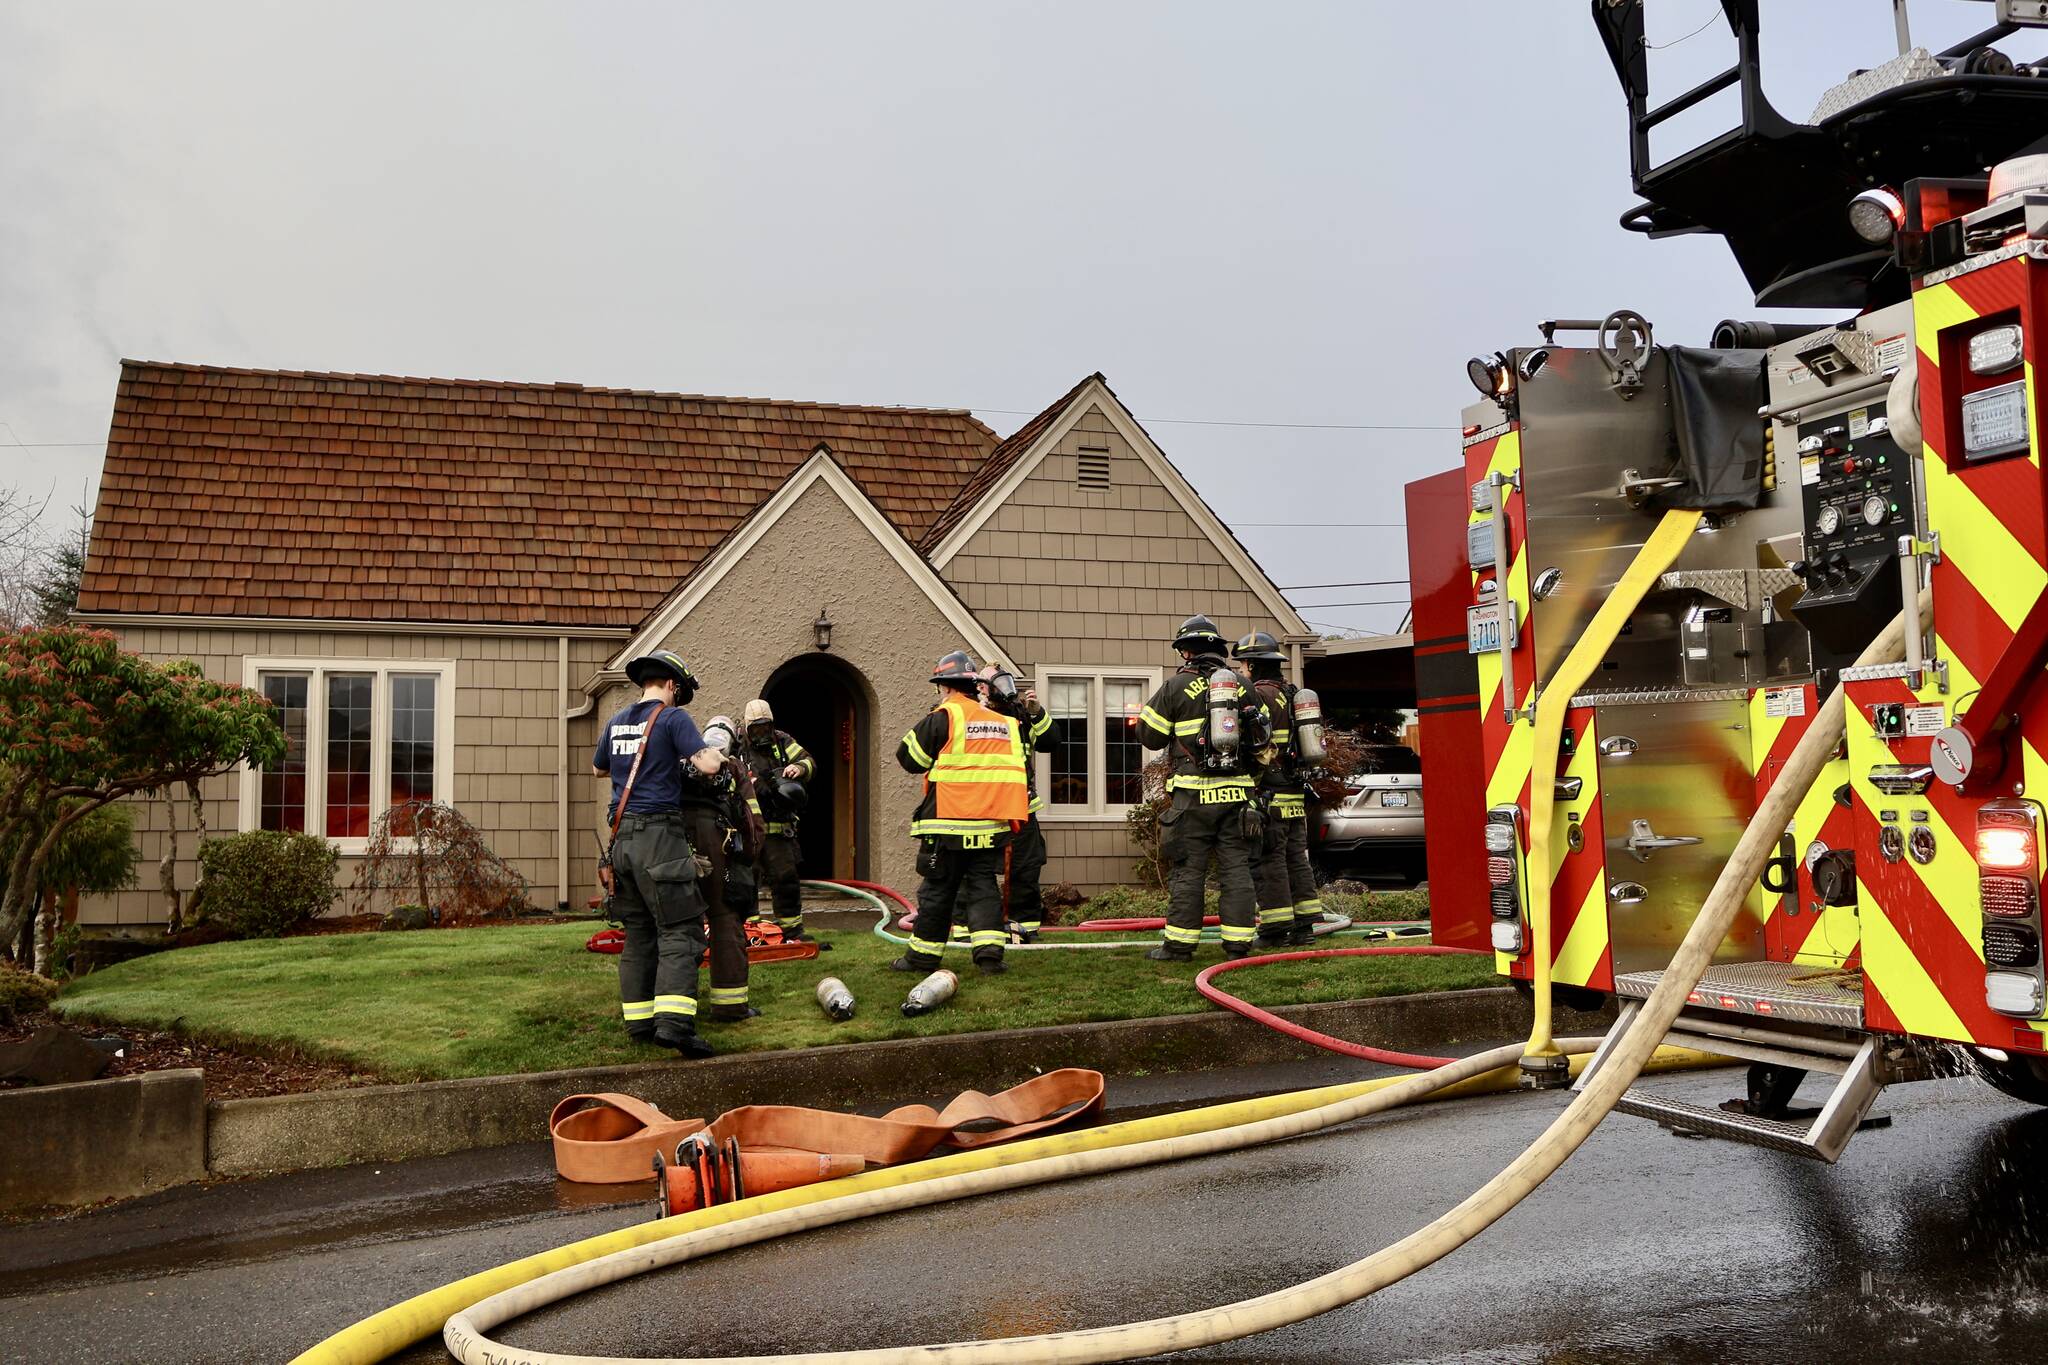 Firefighters fight a house fire in Aberdeen on Thursday morning. (Michael S. Lockett / The Daily World)